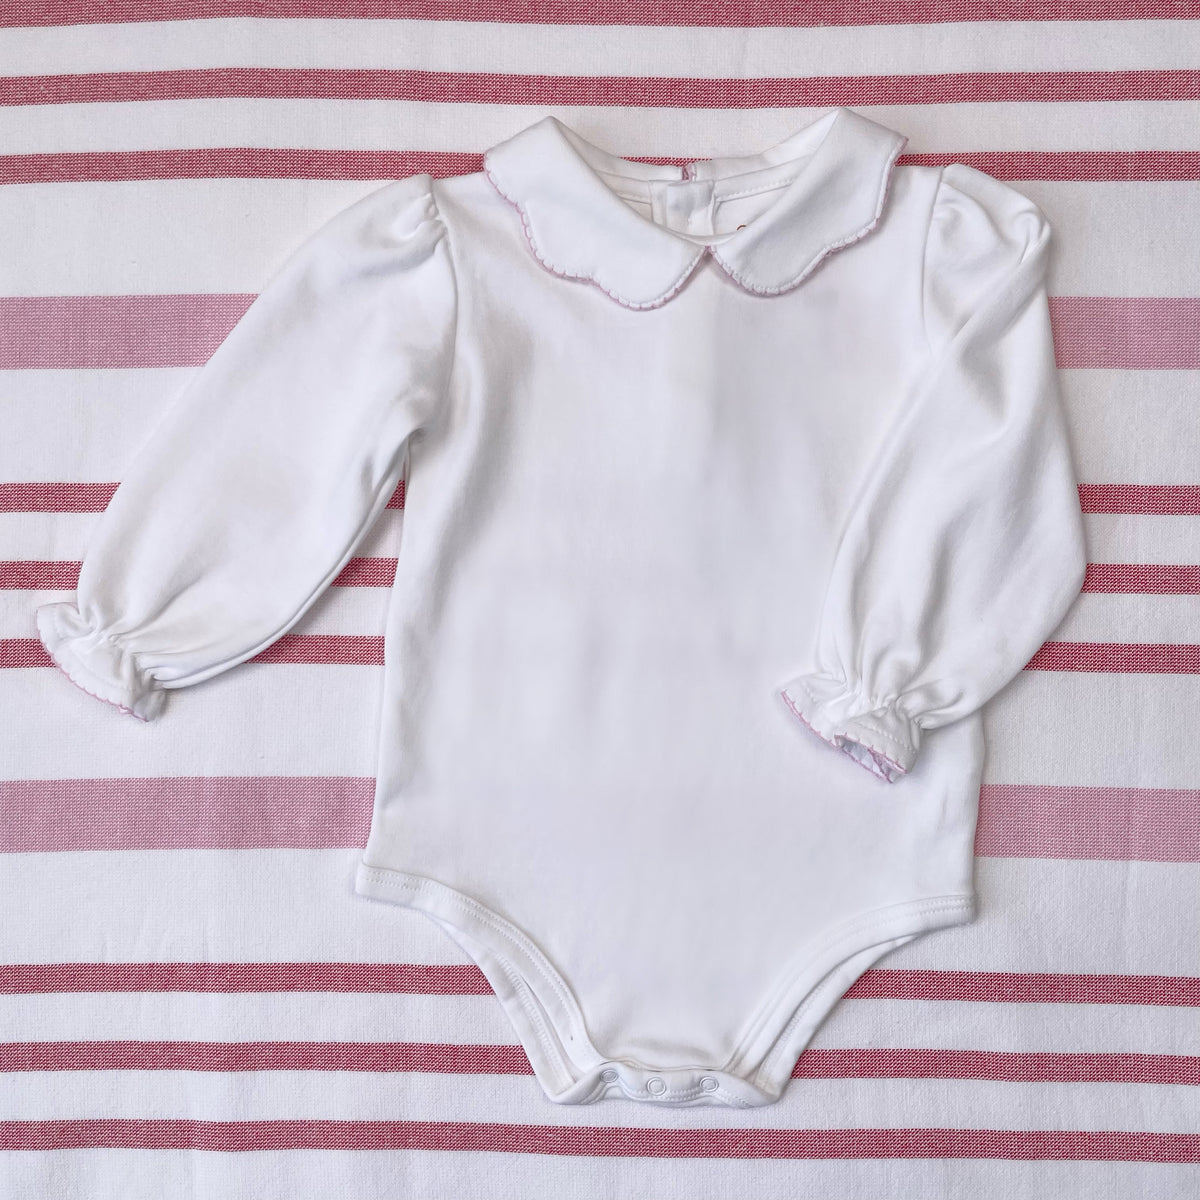 Sally Scallop Collar Peterpan Shirt/Onesie with Pink Piping